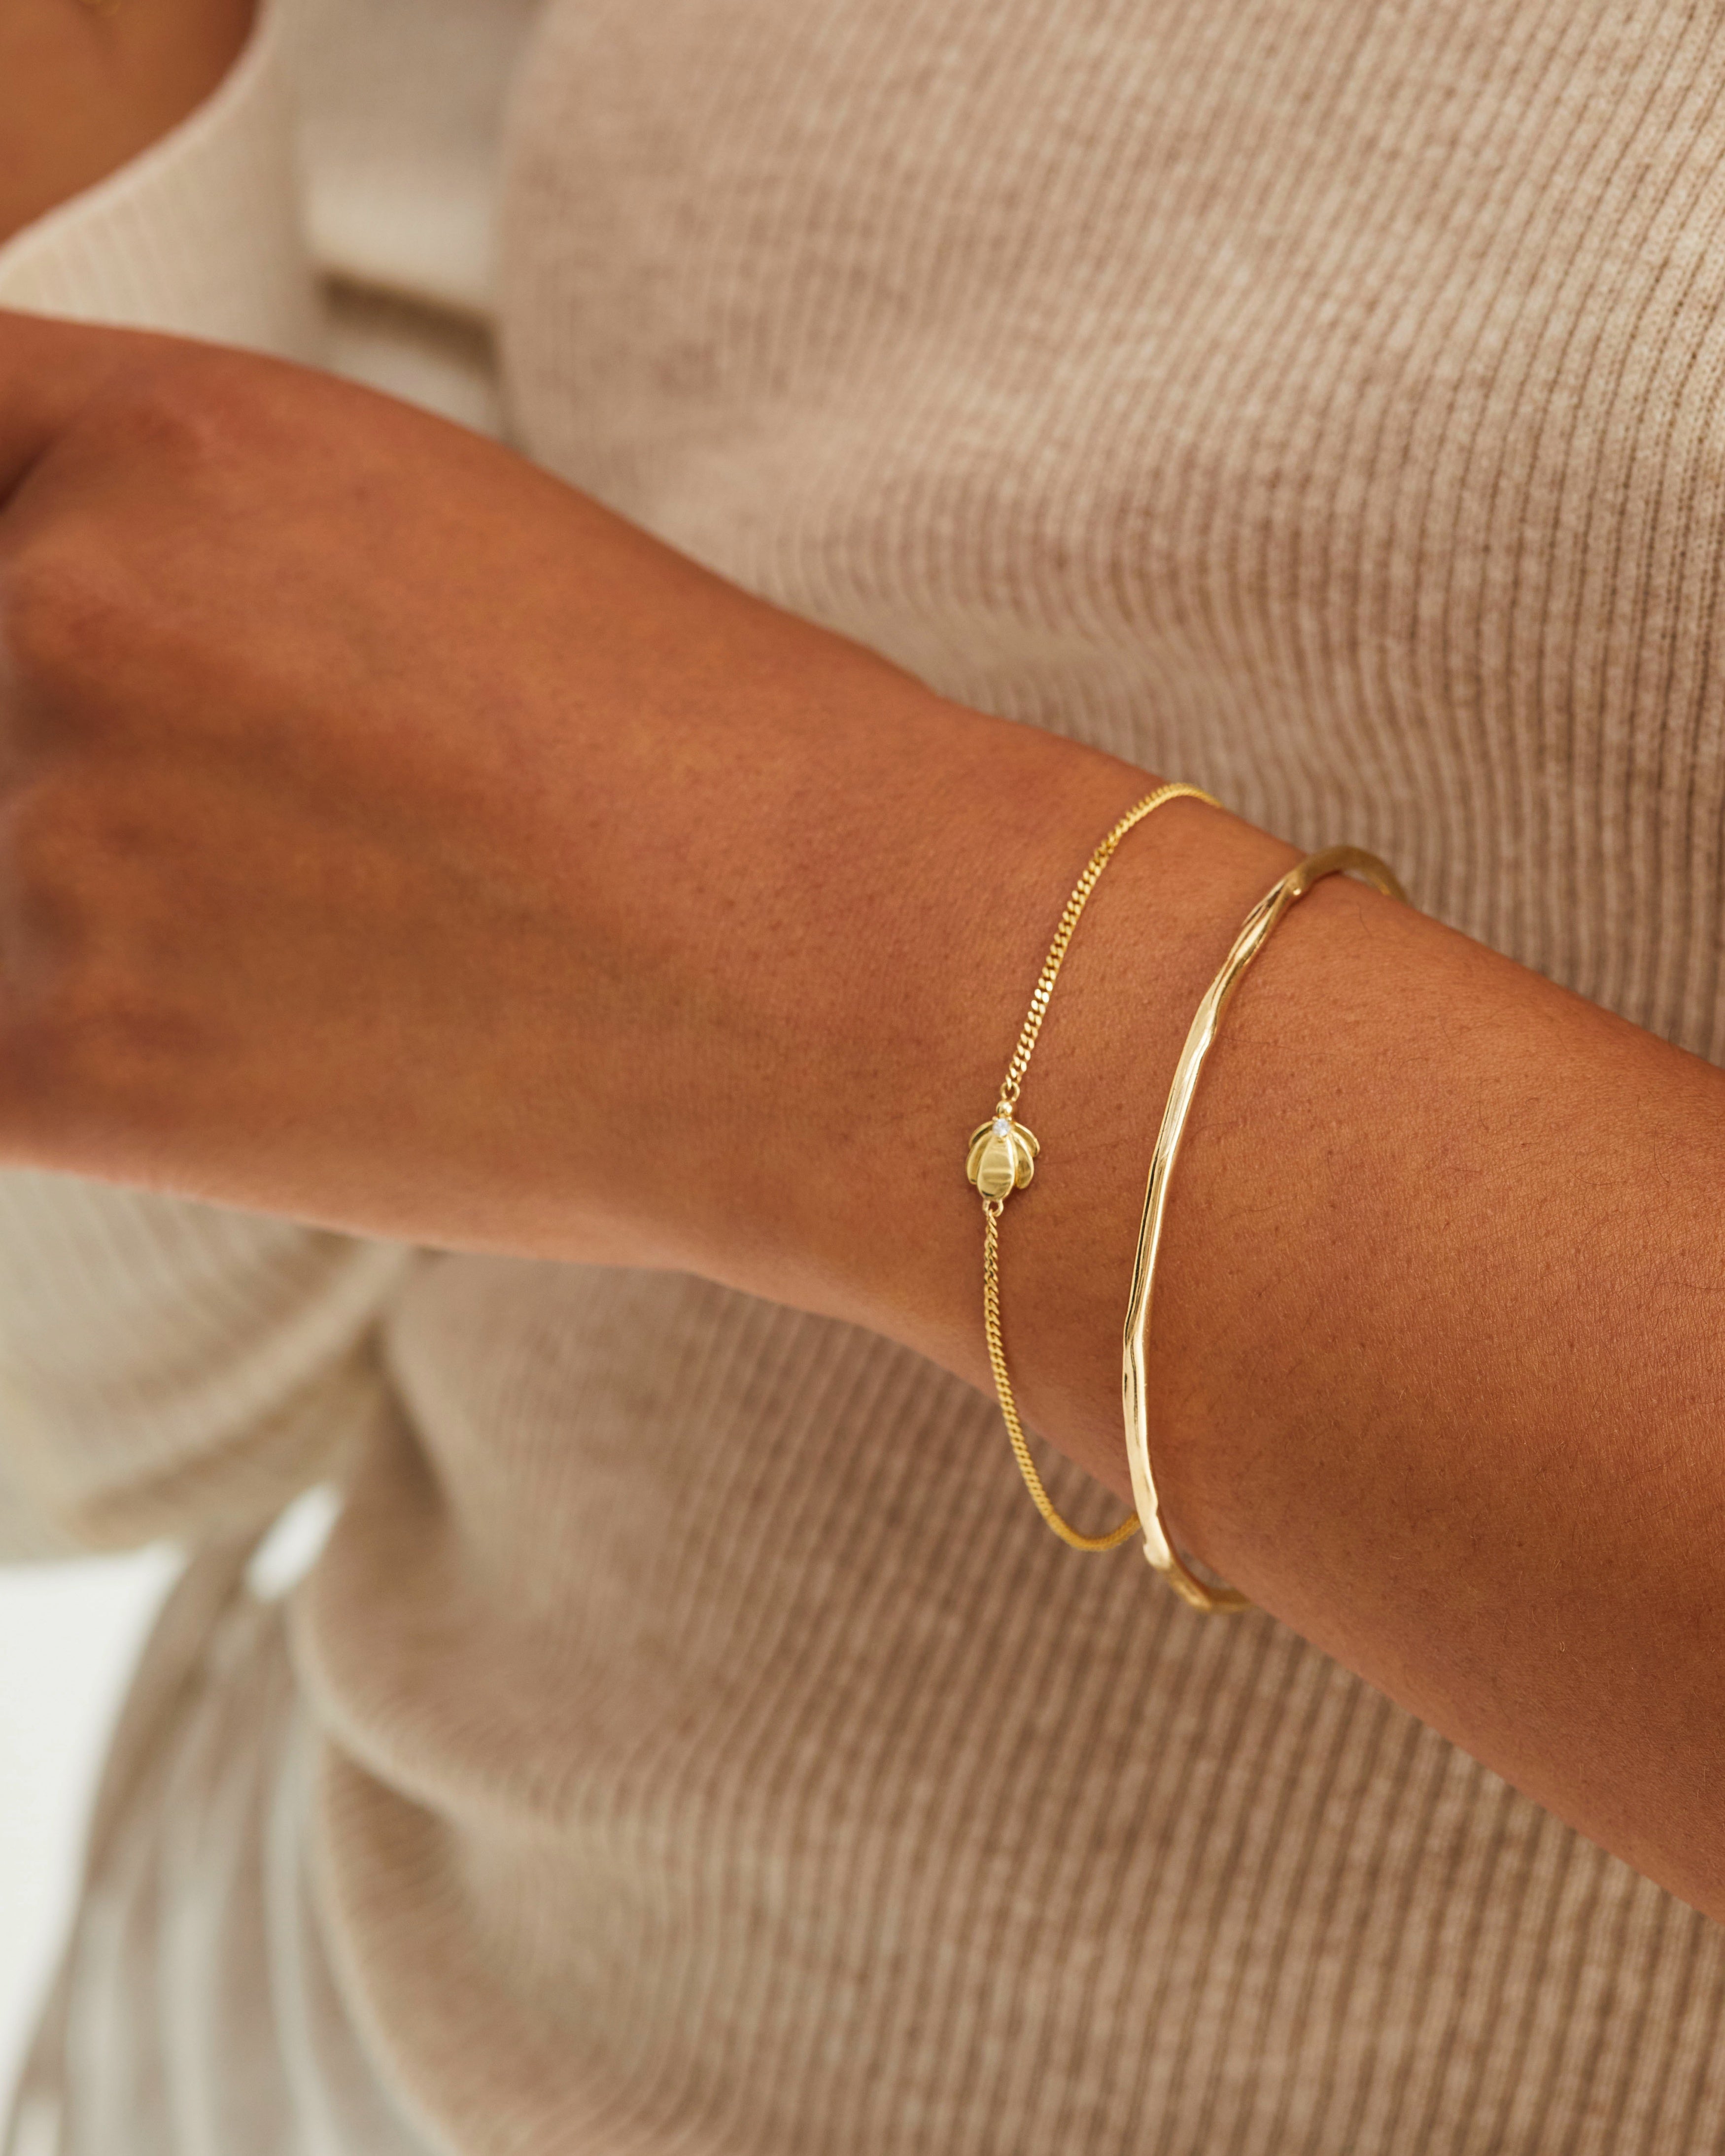 Dainty Gold or Silver Loop Chain Bracelet Gold